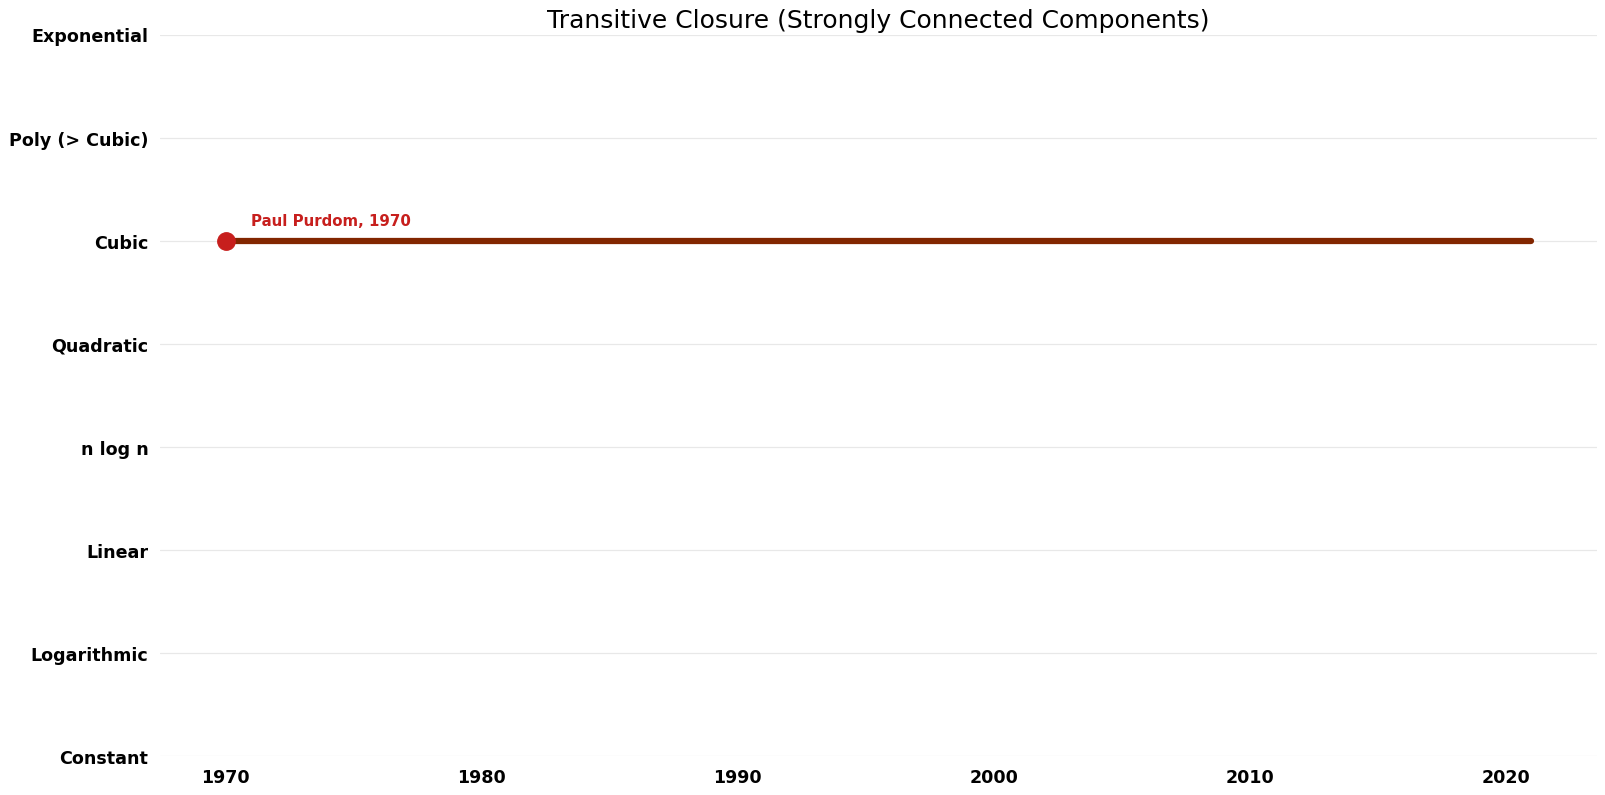 File:Strongly Connected Components - Transitive Closure - Time.png